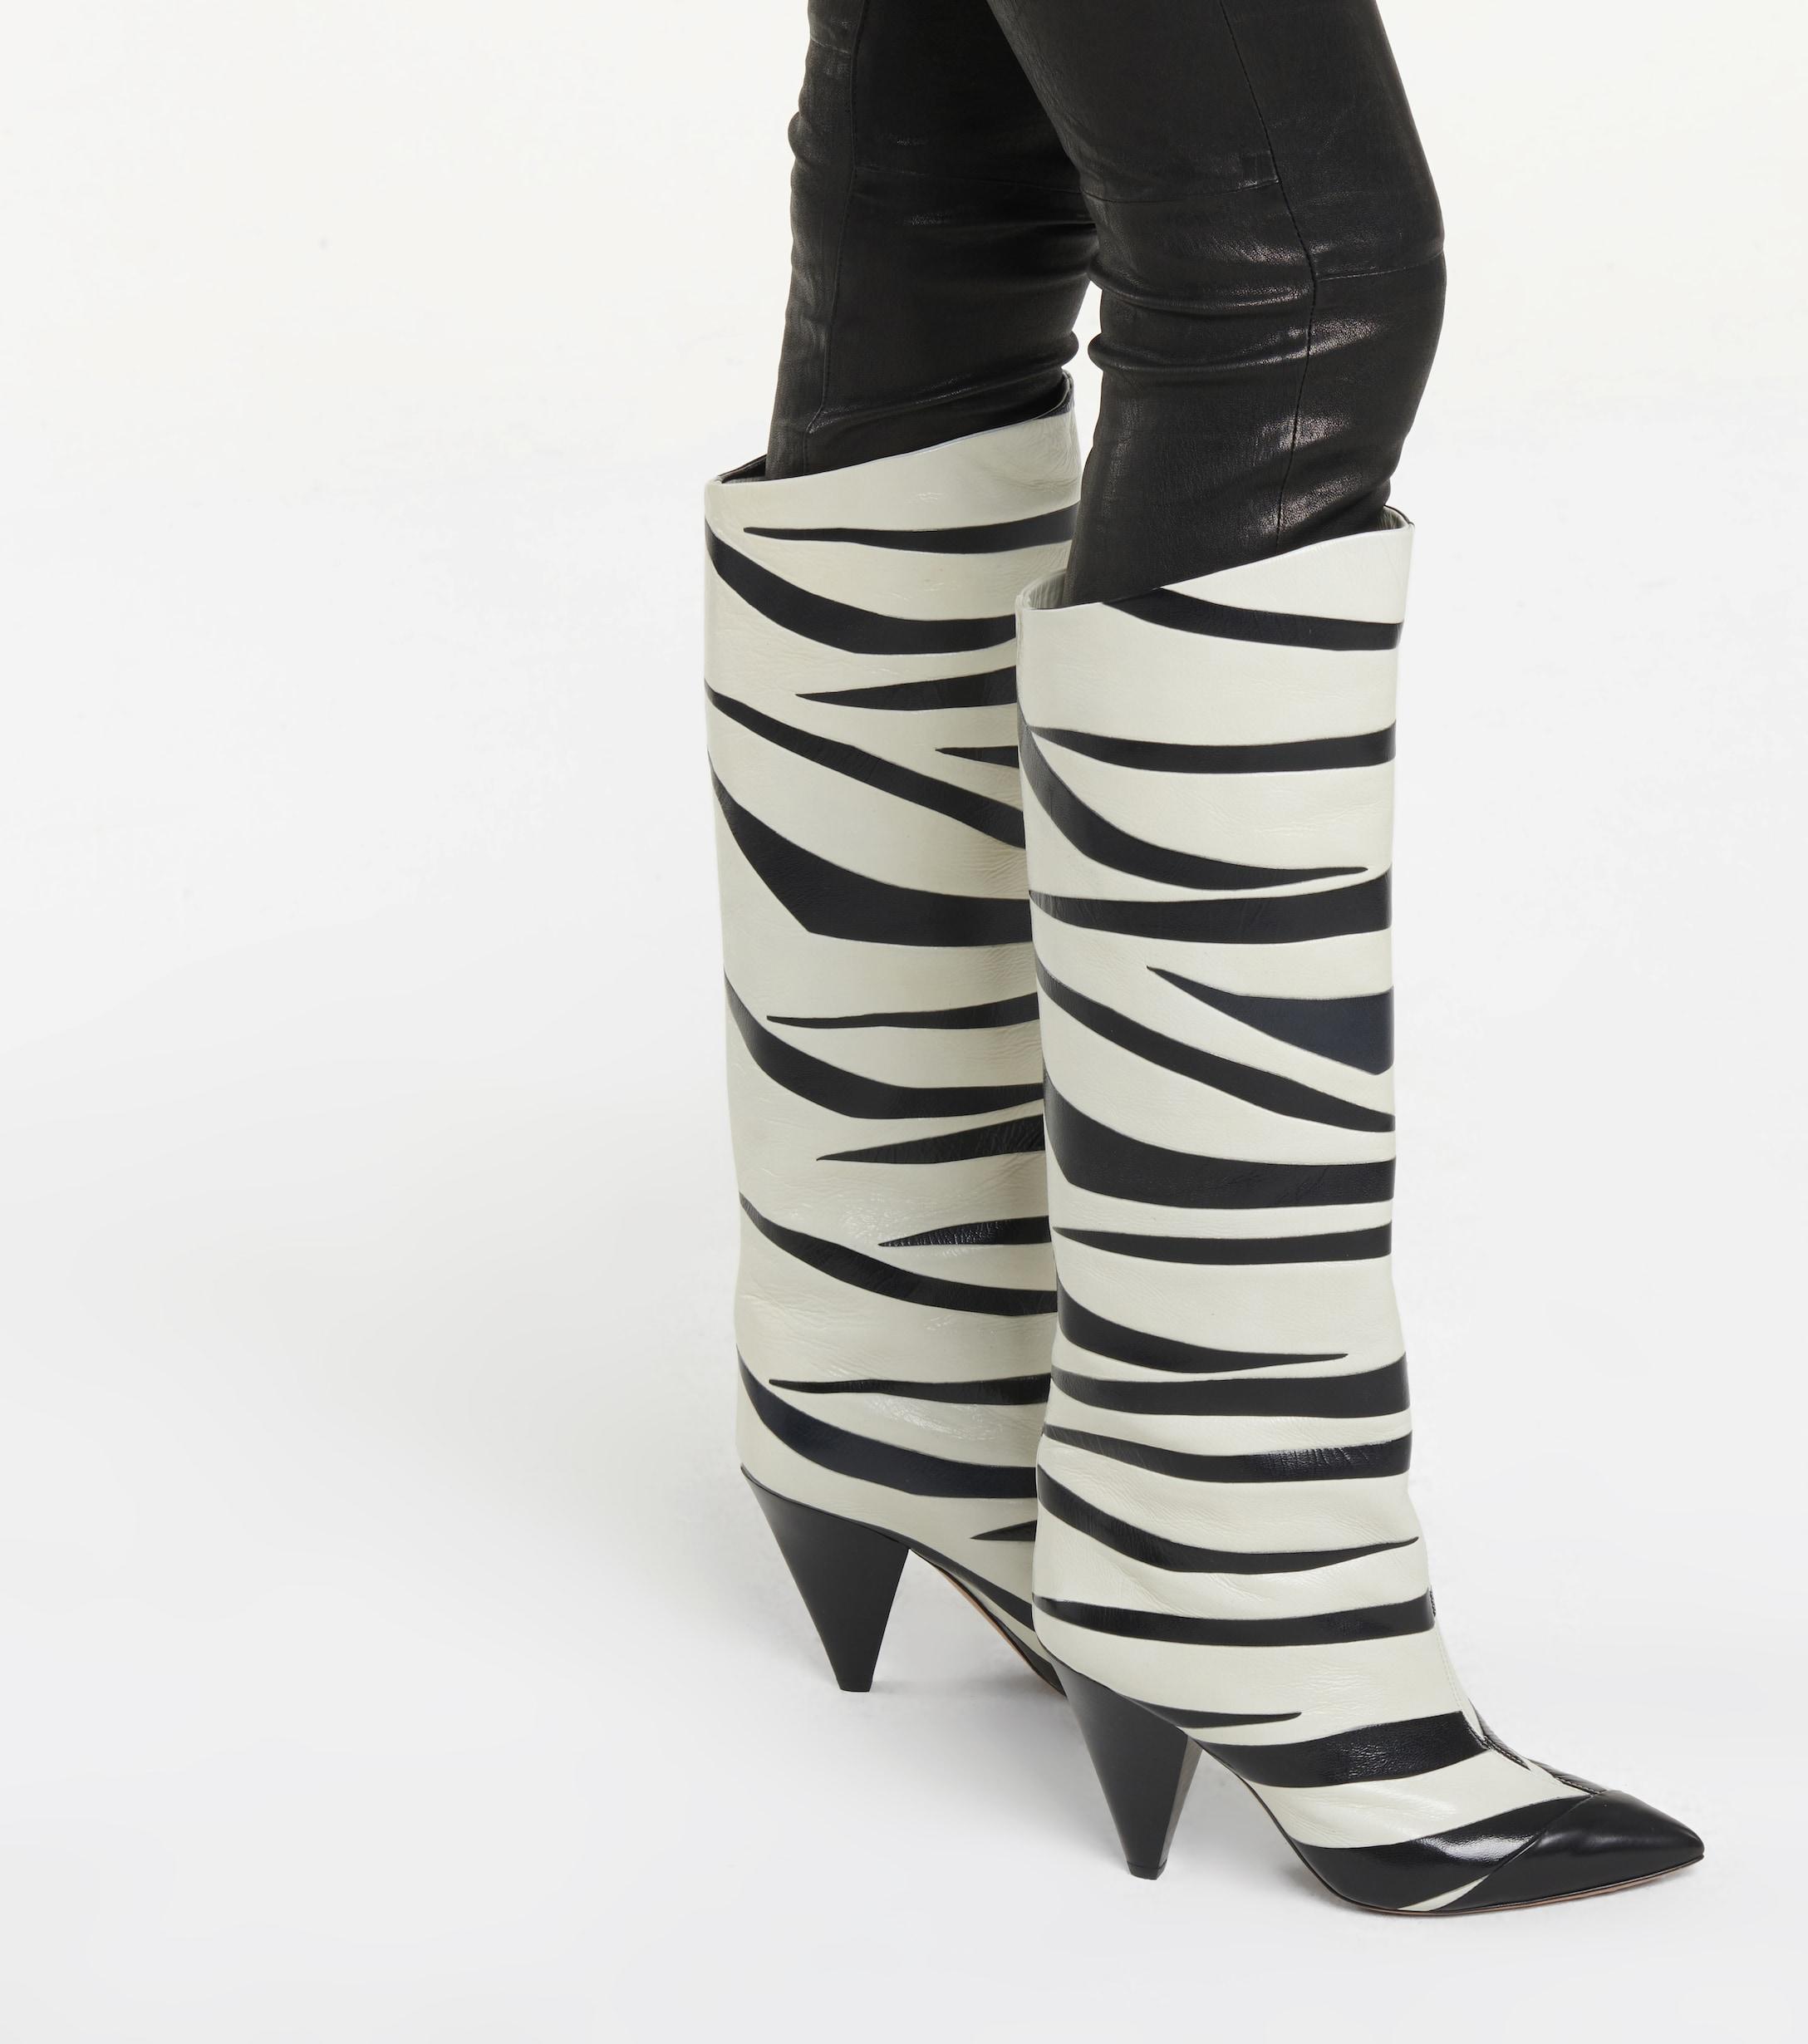 Isabel Marant Larzee Leather Knee-high Boots in Black | Lyst